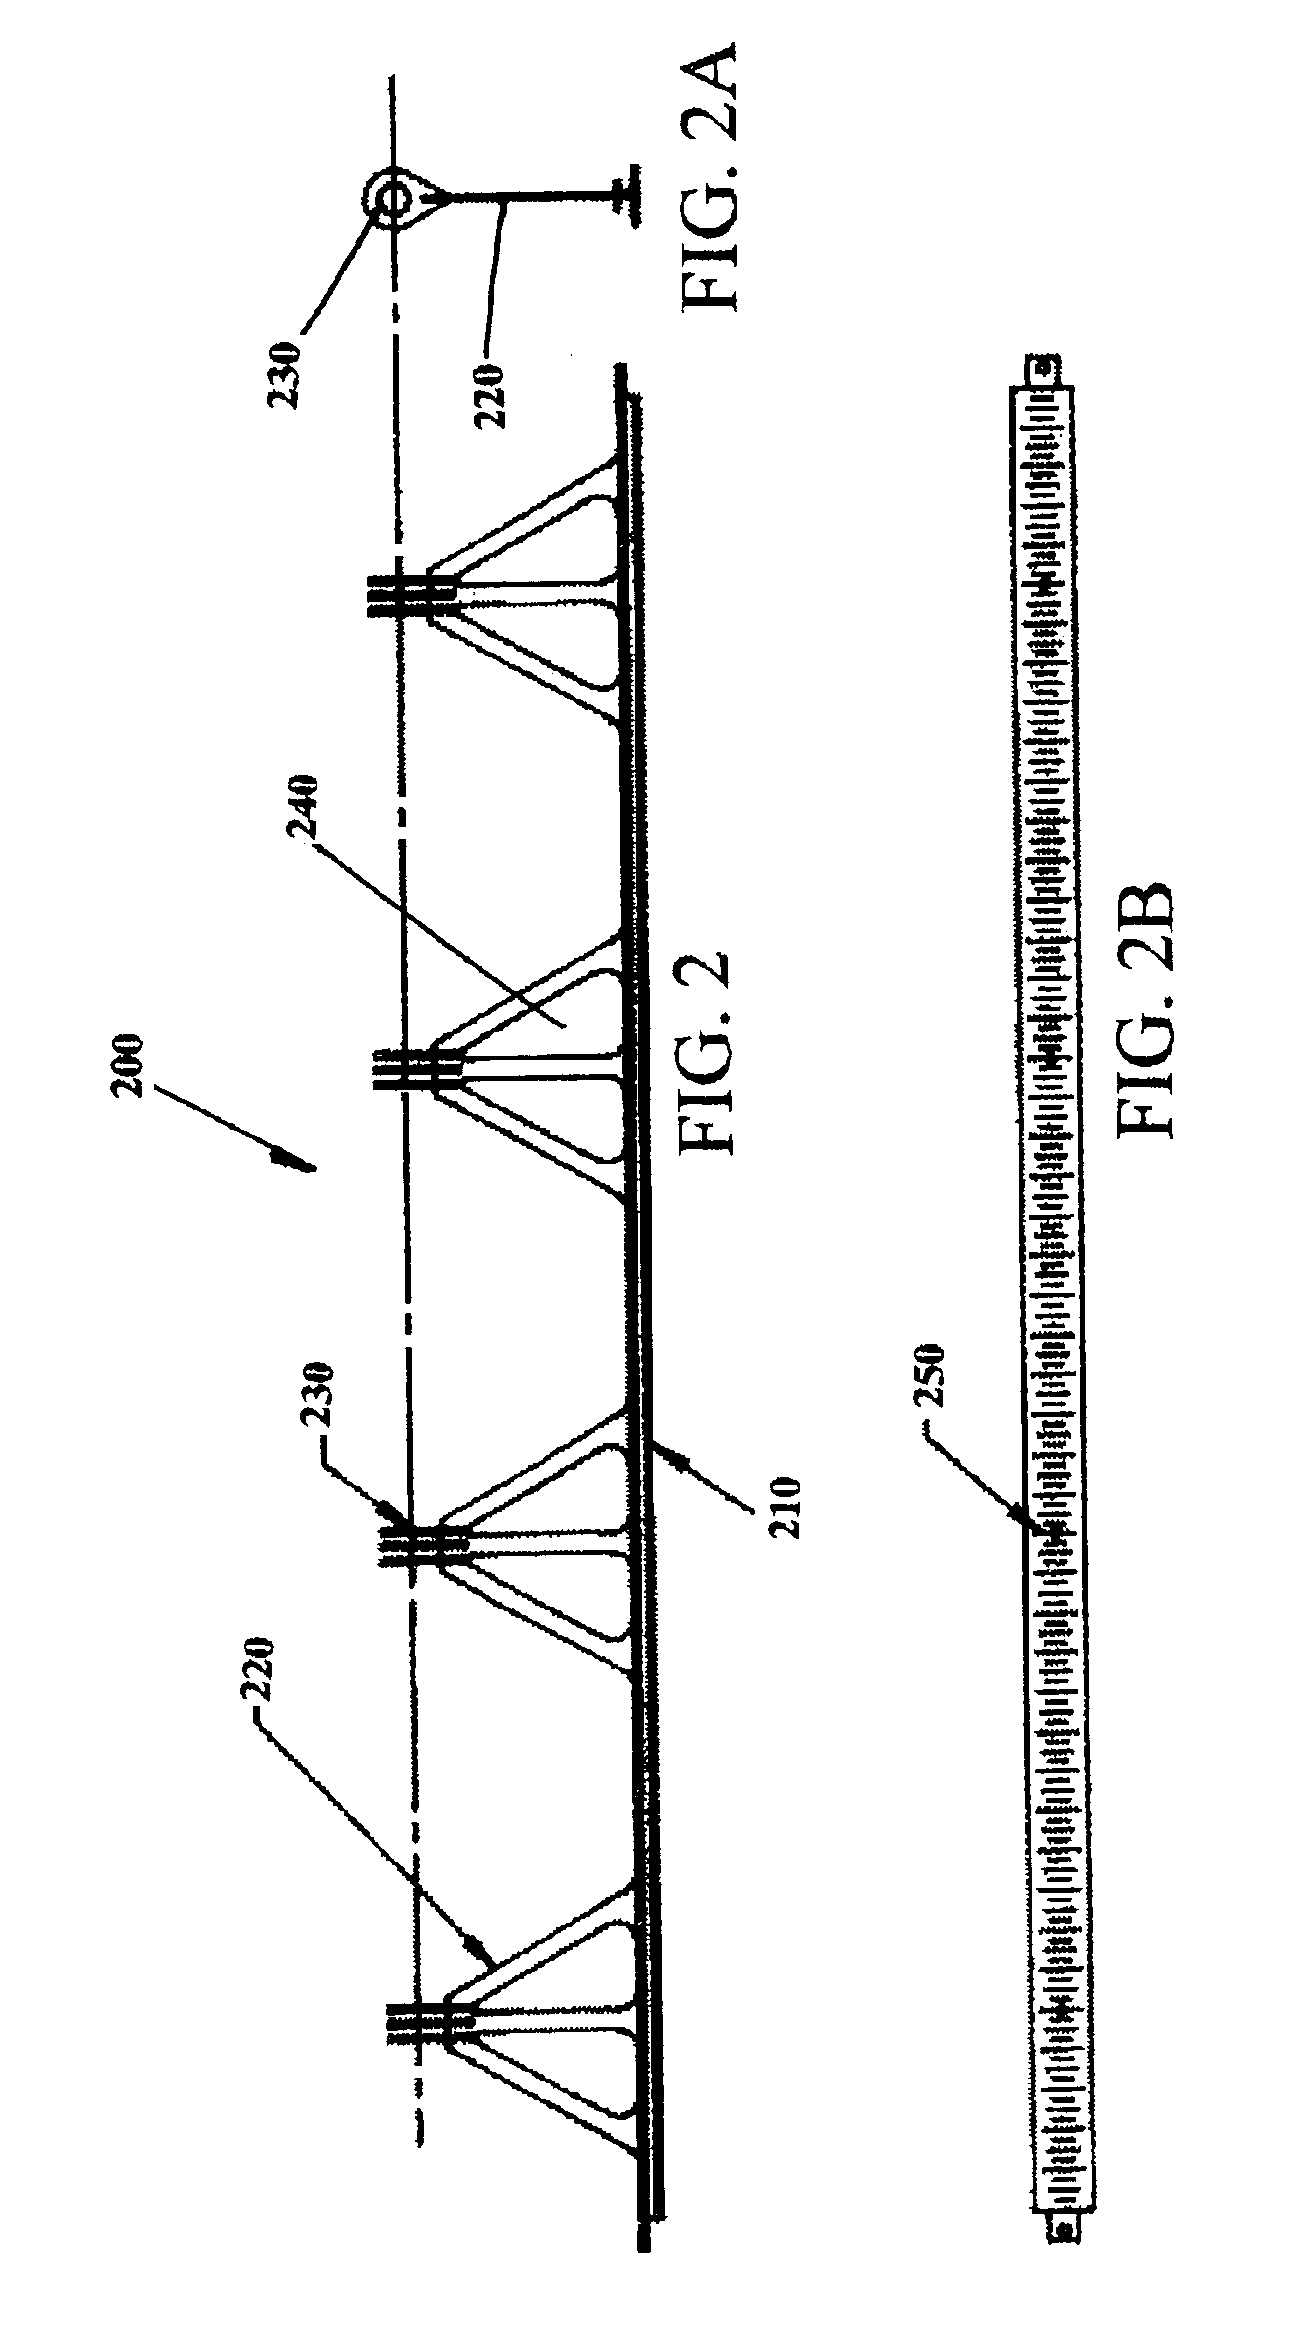 Concrete forming system and method